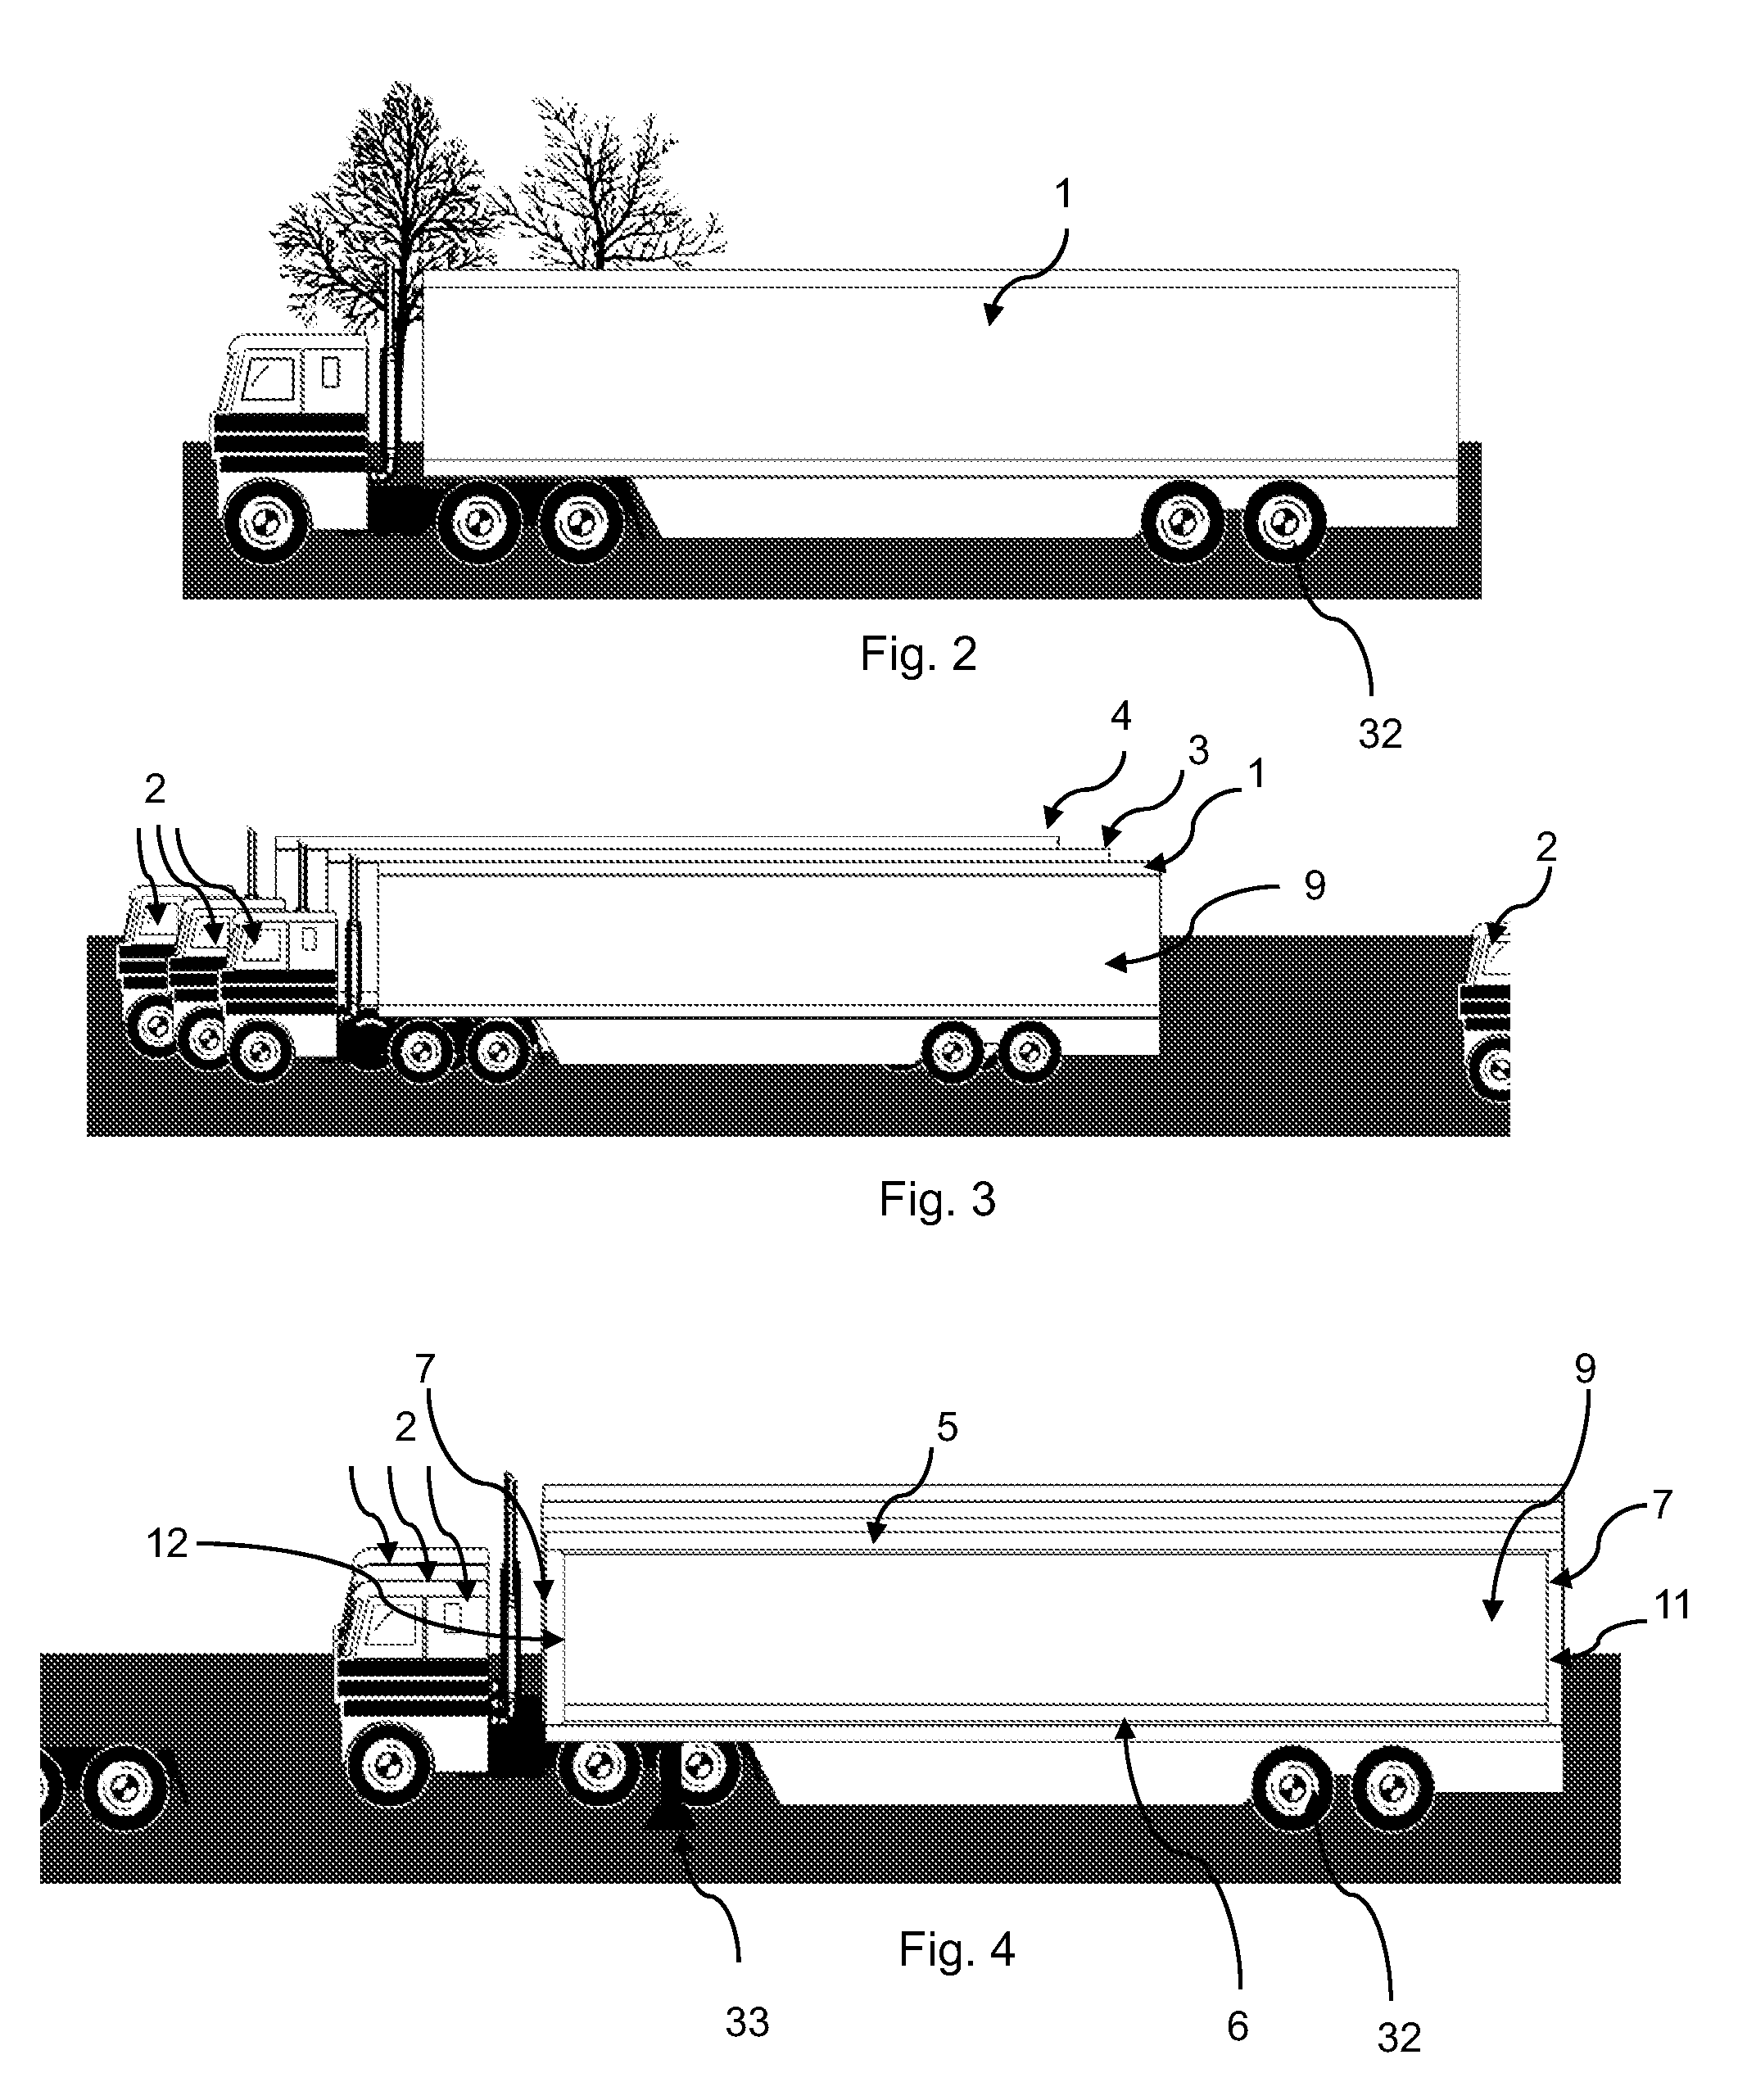 Building system and method with prefabricated structures joined between them, reusable and transportable